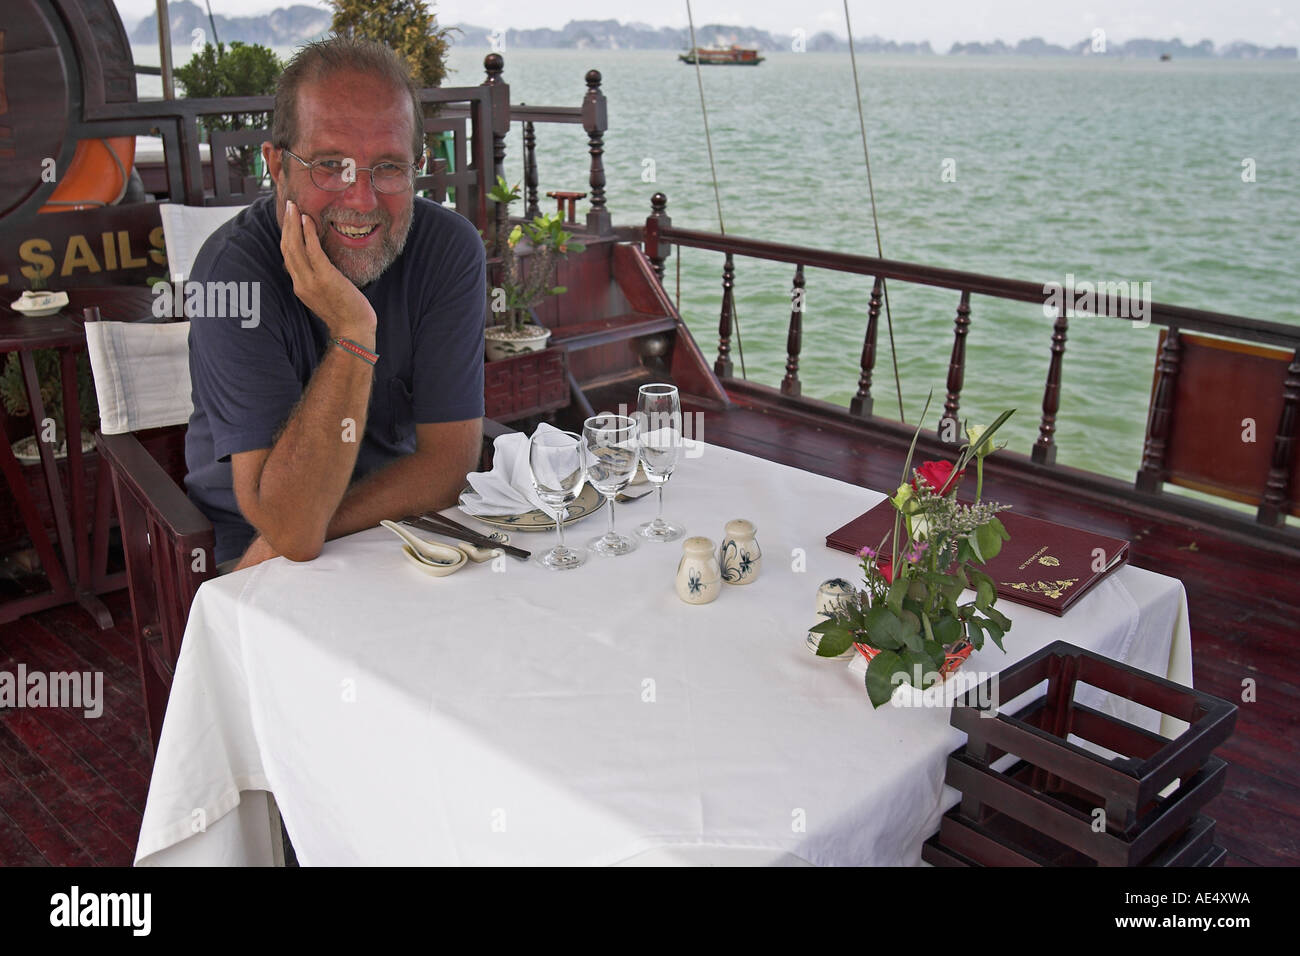 Visitor at dining table with flower arrangement and menu luxury cruising junk Halong Bay Vietnam Stock Photo